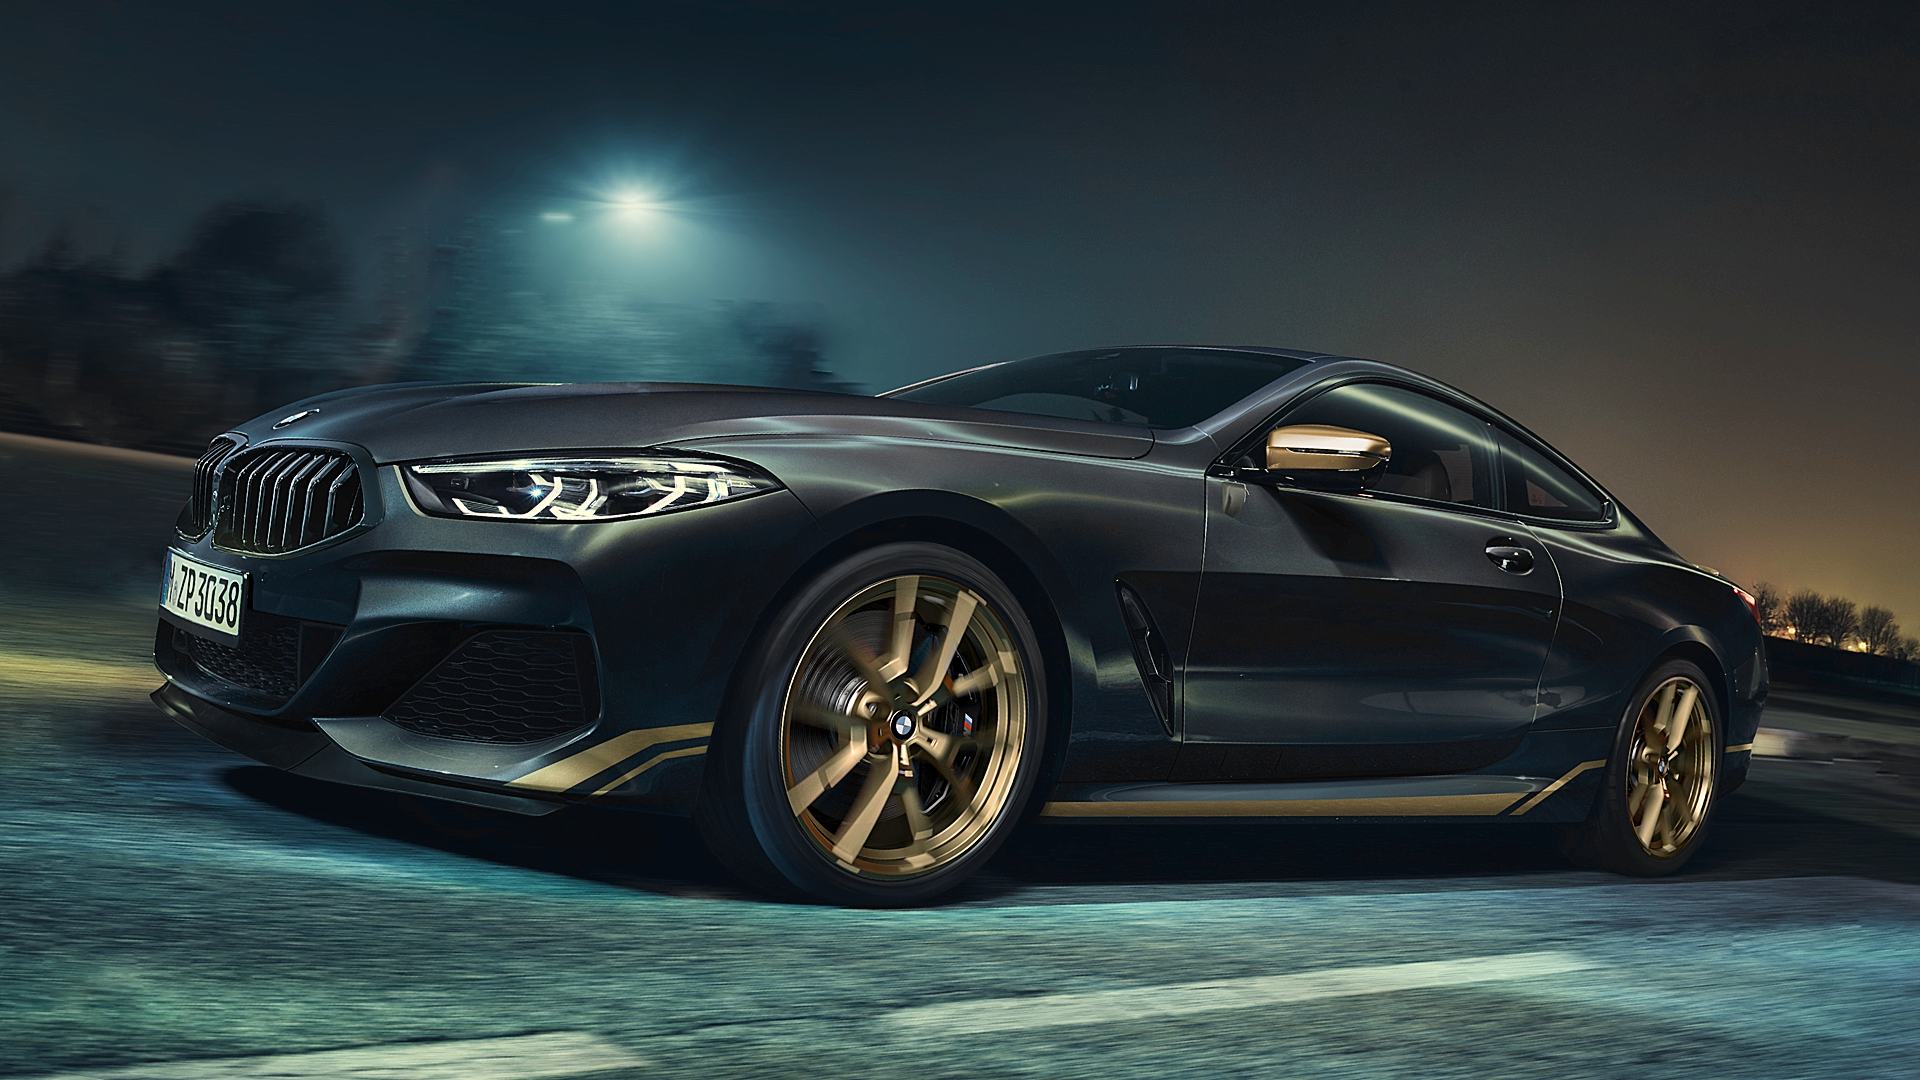 BMW 8 Series Black Coupe Picture Wallpaper